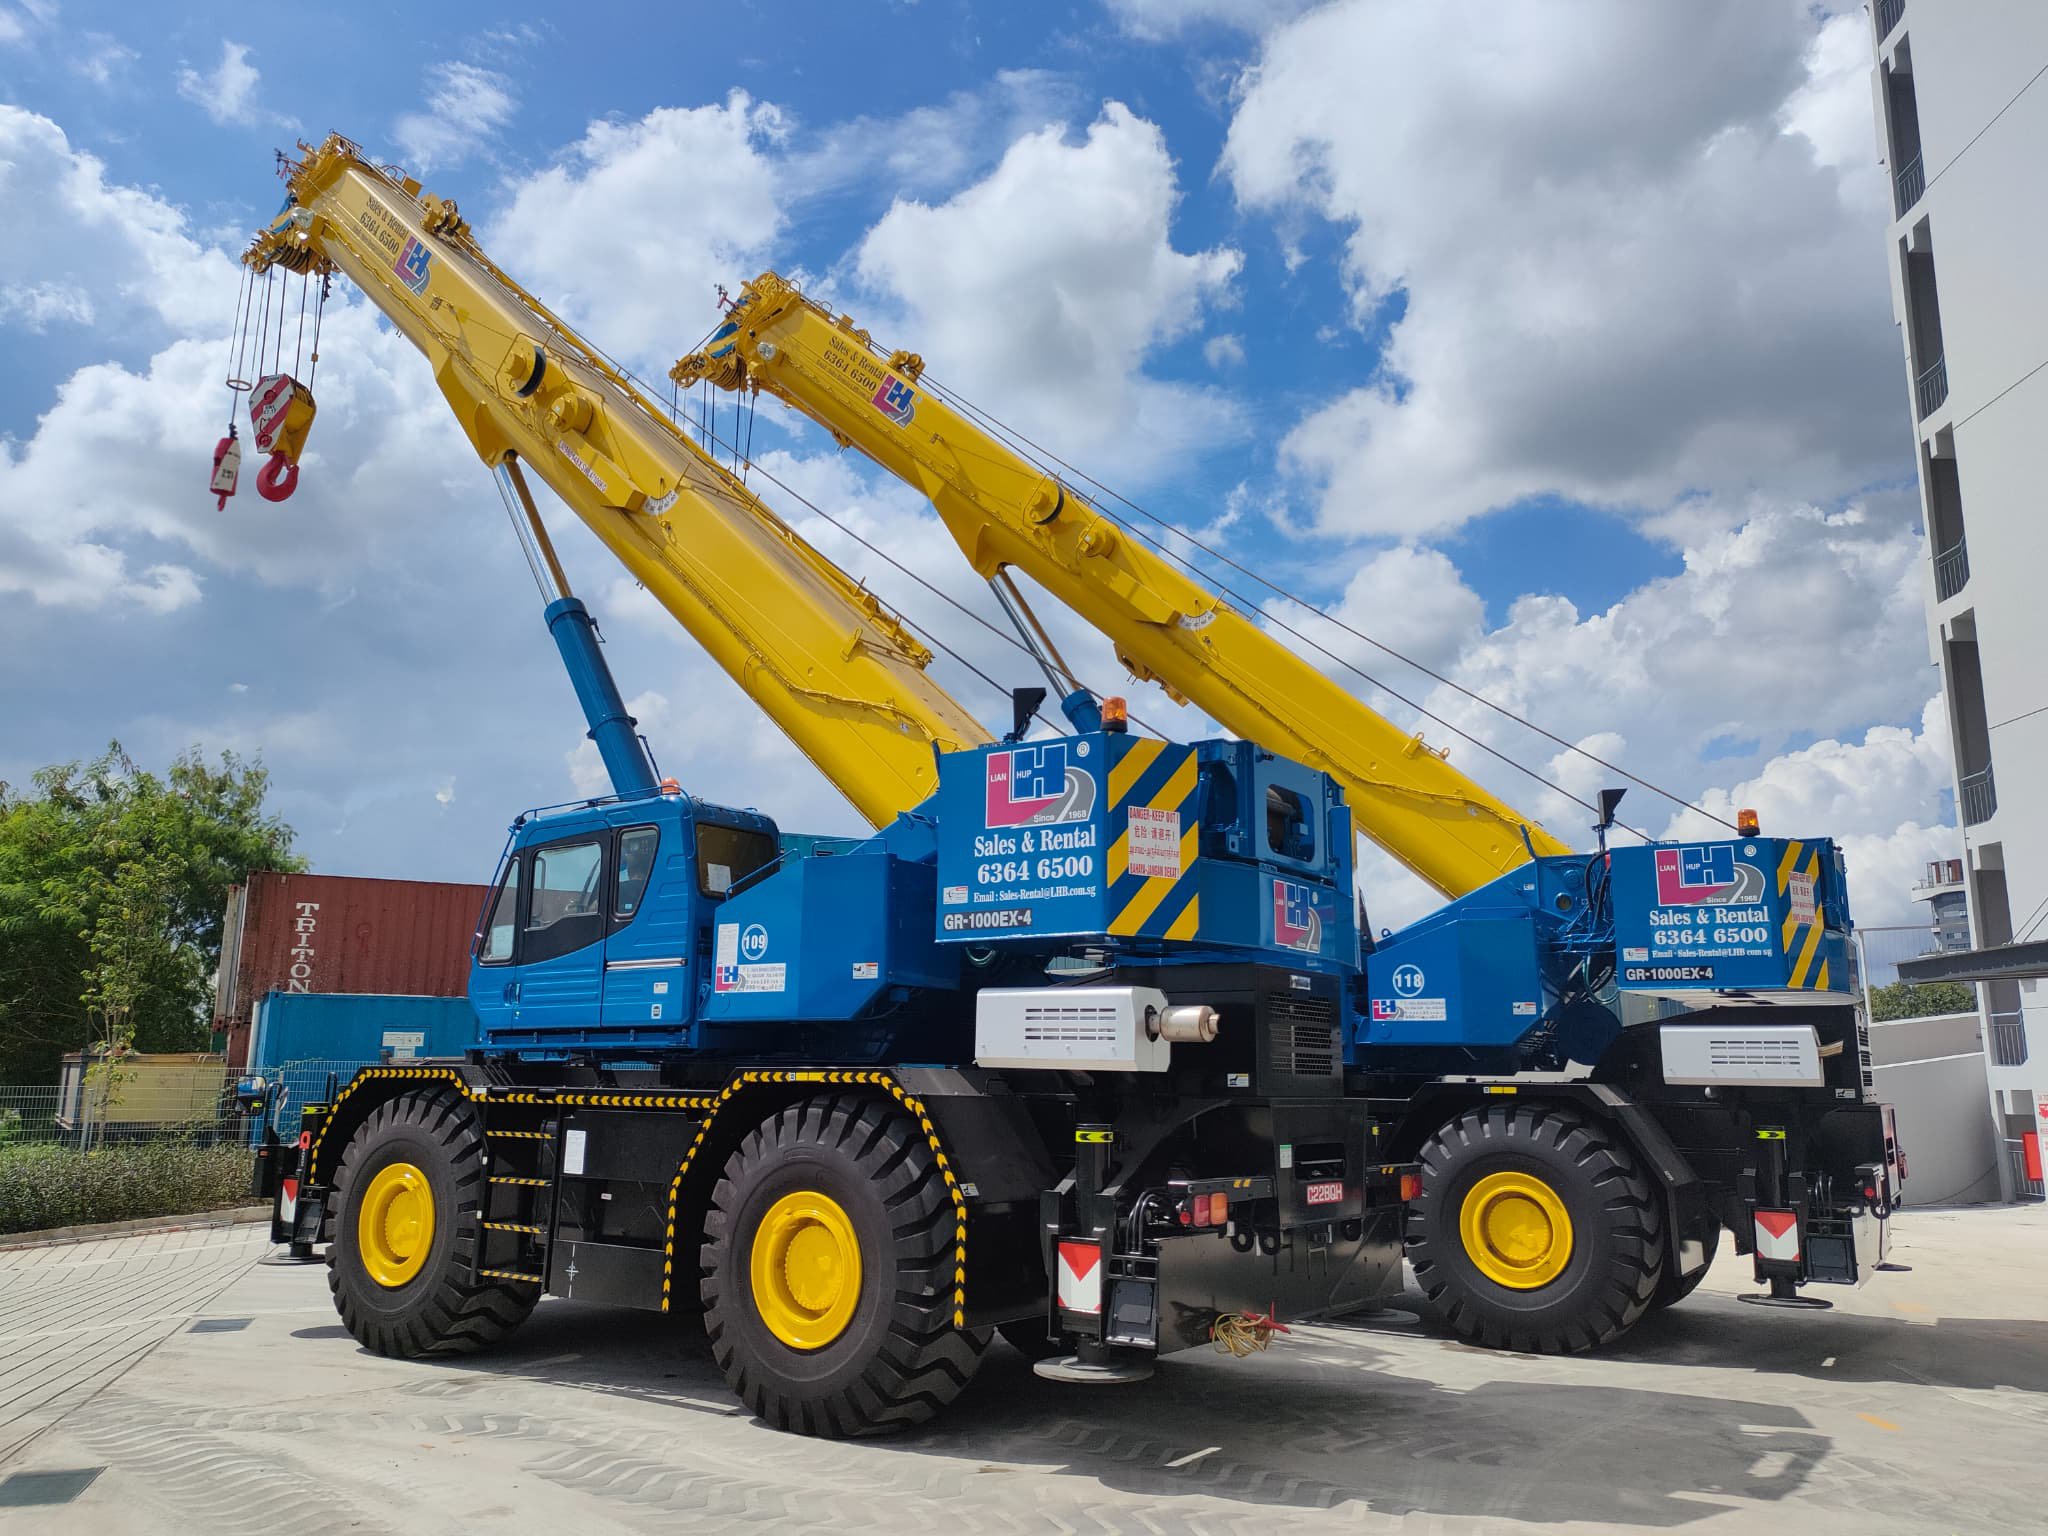 GR-1000EX-4 Rough Terrain Cranes purchased by LH Construction & Machinery Leasing Pte Ltd 